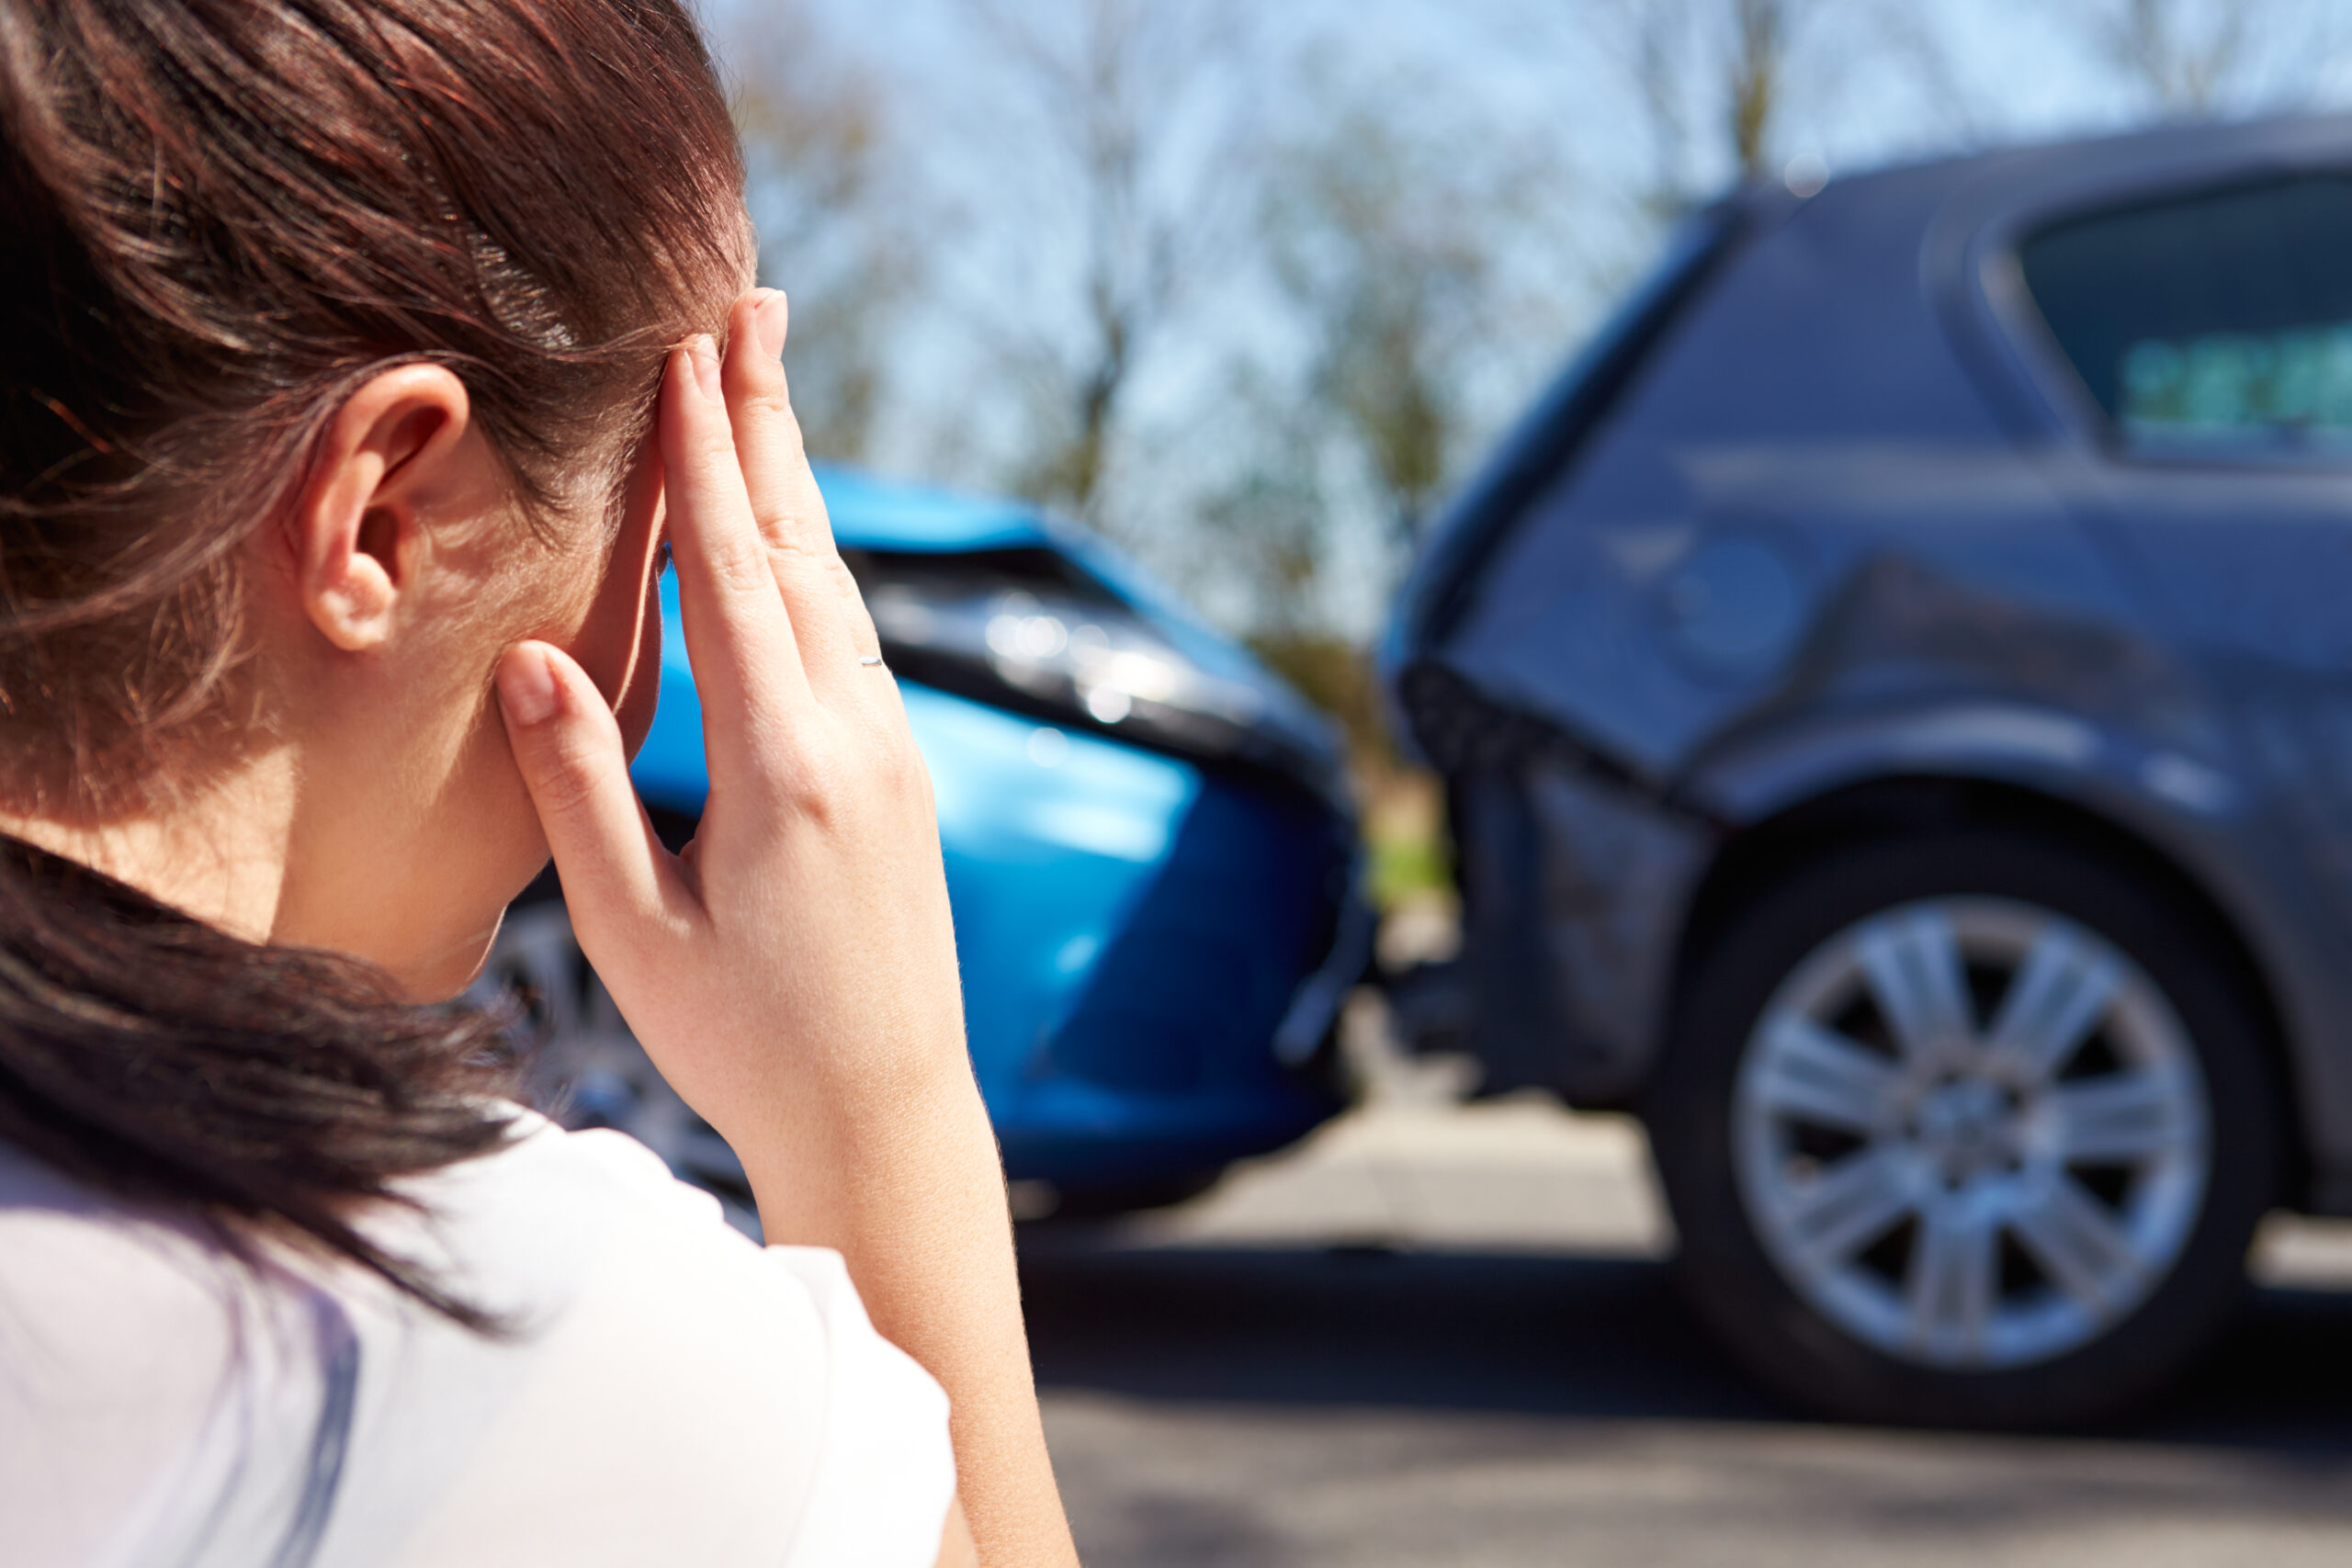 6 Unexpected Ways a Car Accident Can Affect Your Life